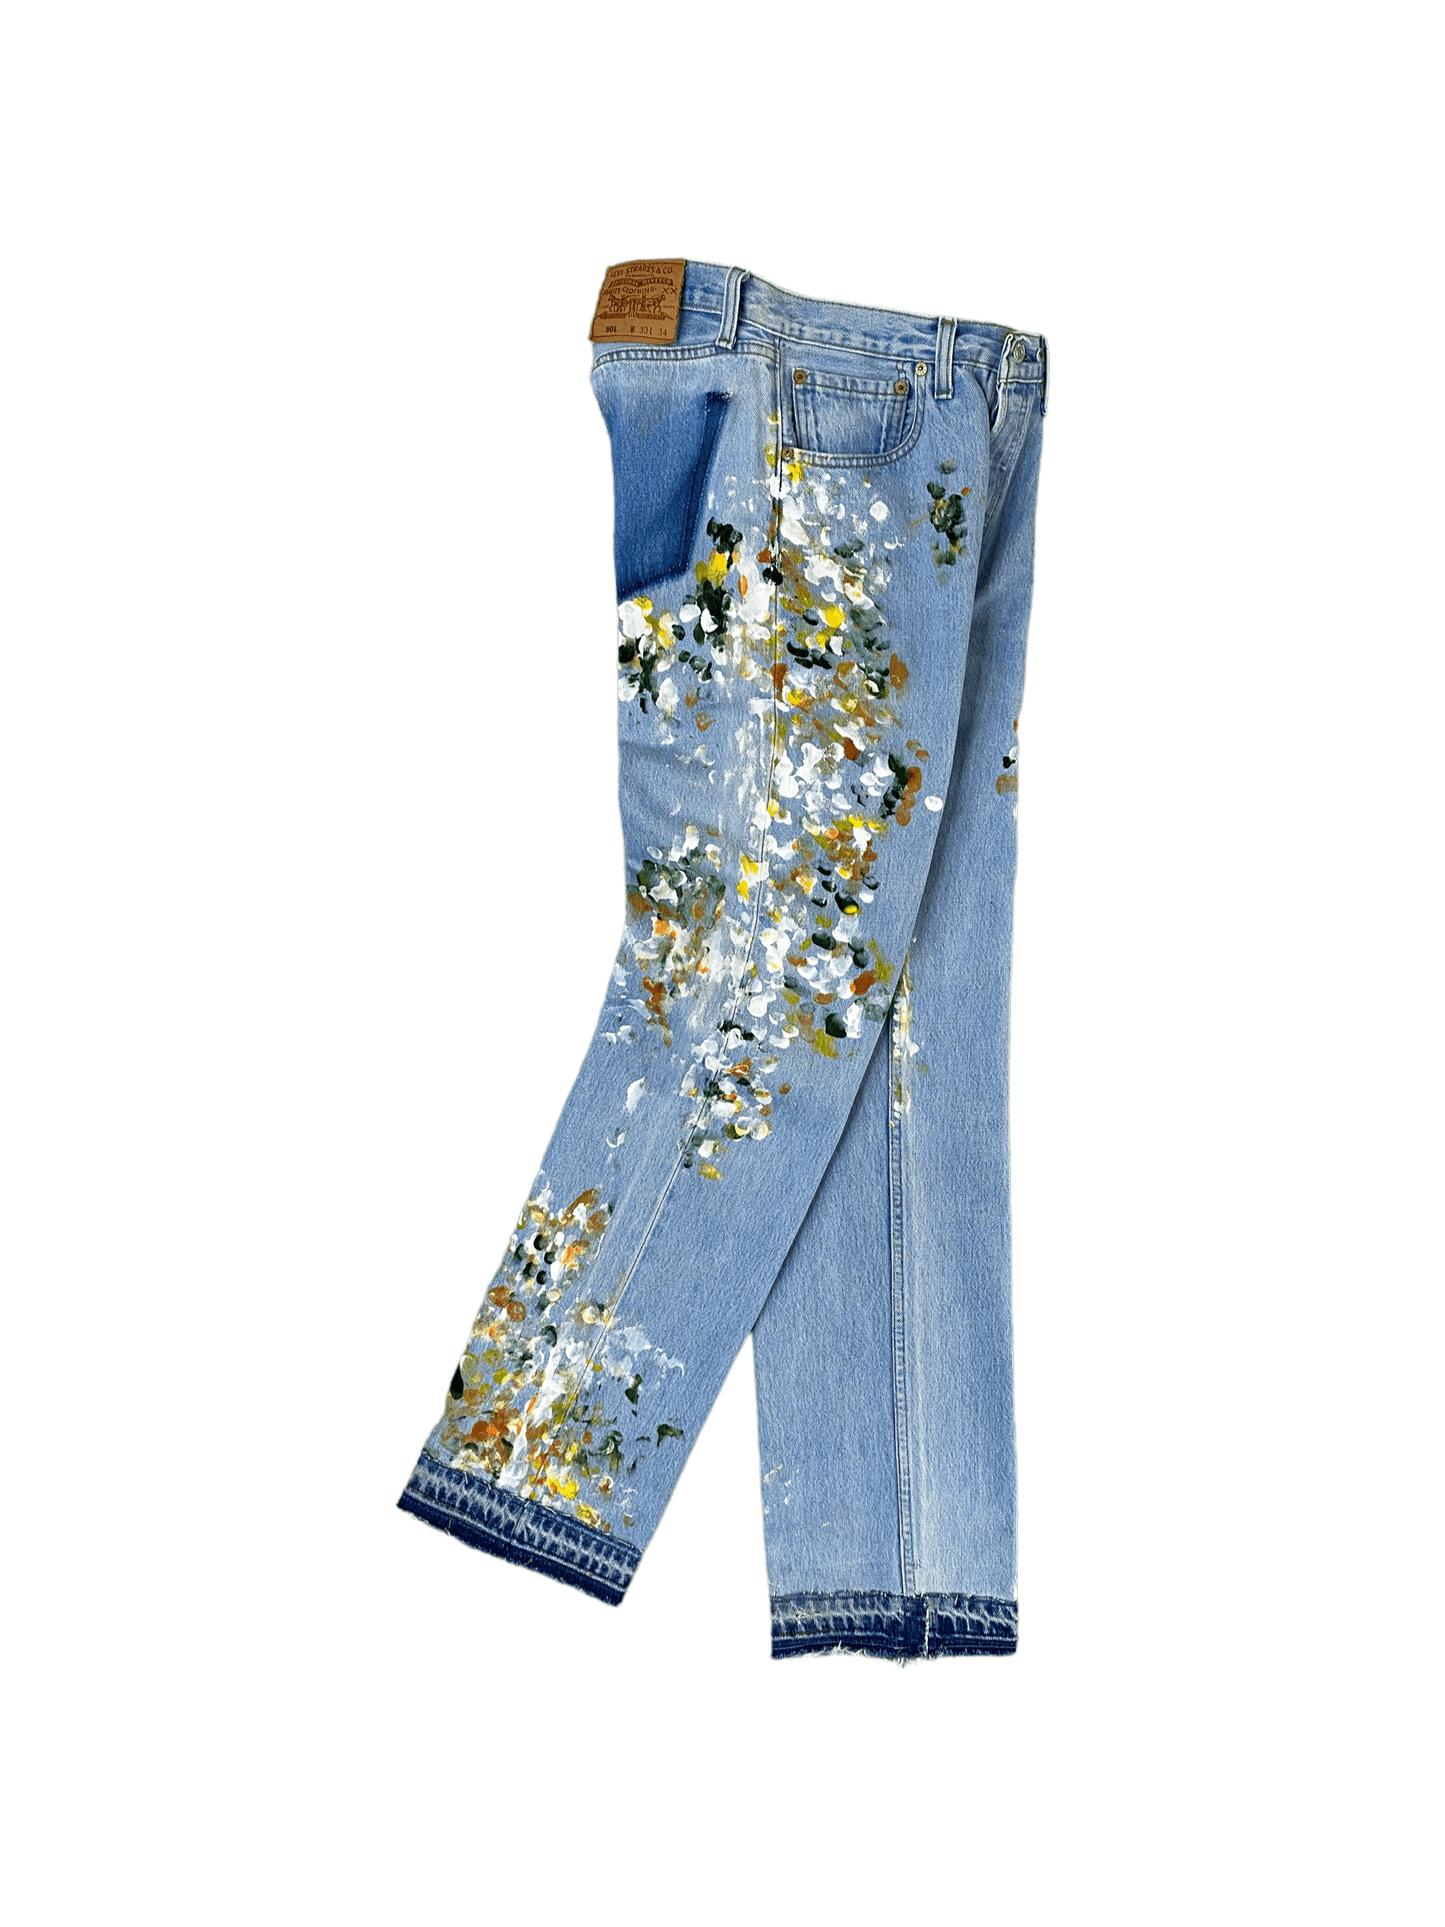 MULTI PAINTED JEANS V1 - Nicolò Puccini